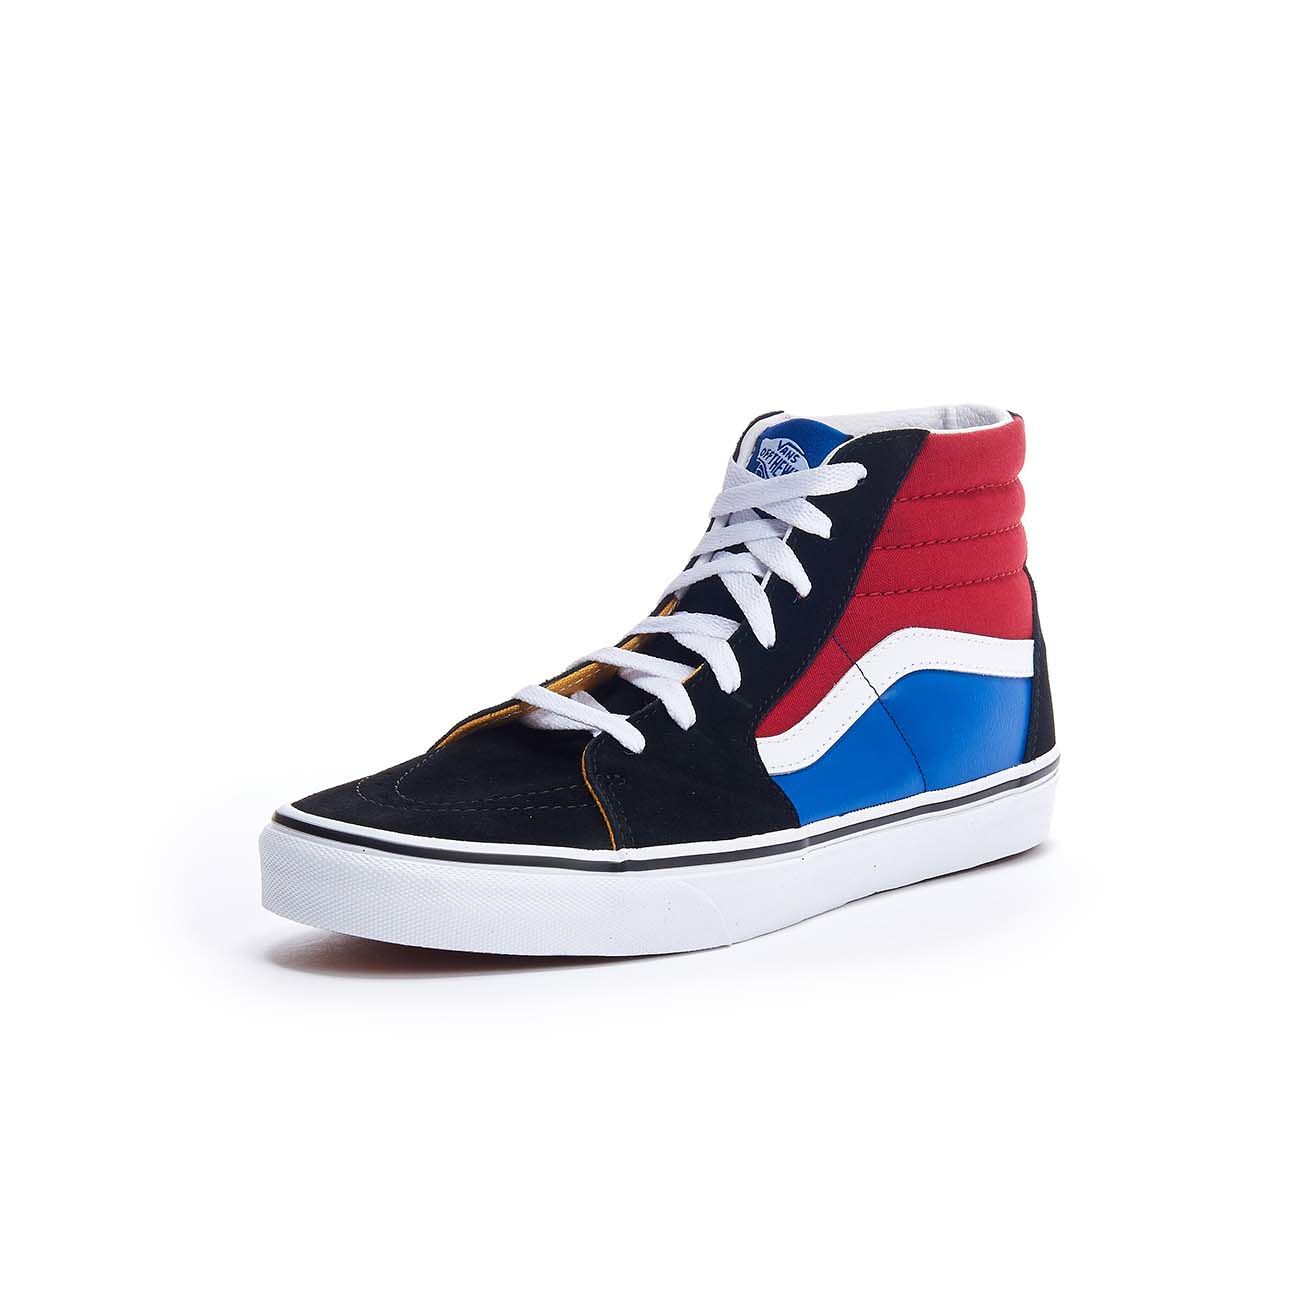 VANS SK8-HI HIGH SNEAKER ECO-LEATHER Chilli Kid FABRIC IN Pepper Mascheroni Black Store AND 